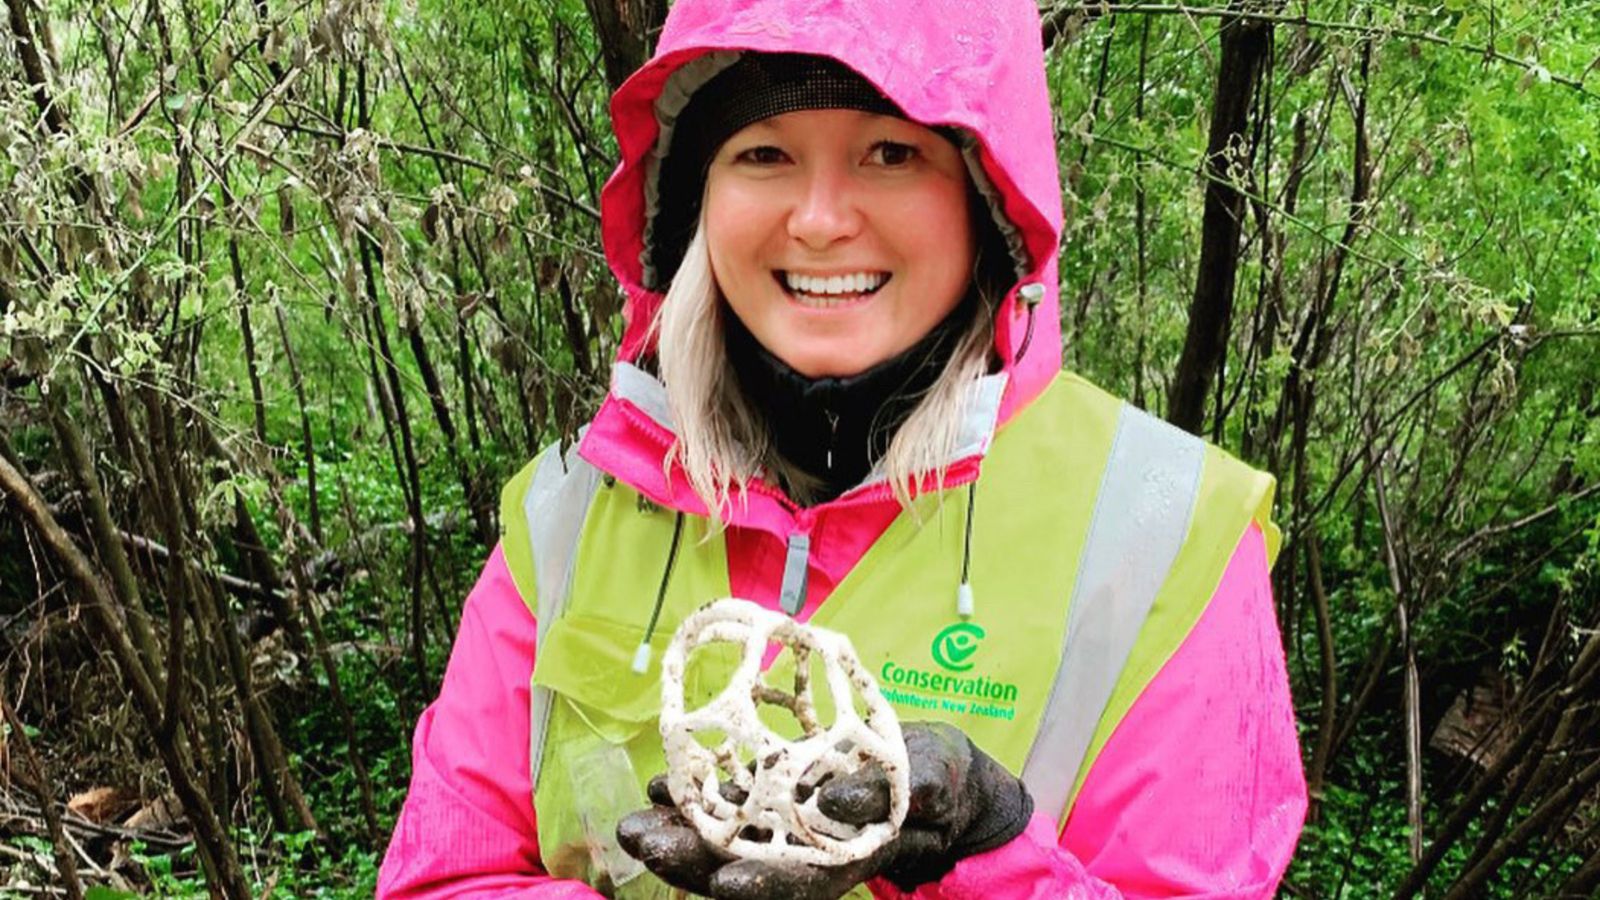 Student in forest holding fungus wearing Conservation Volunteer New Zealand vest.  